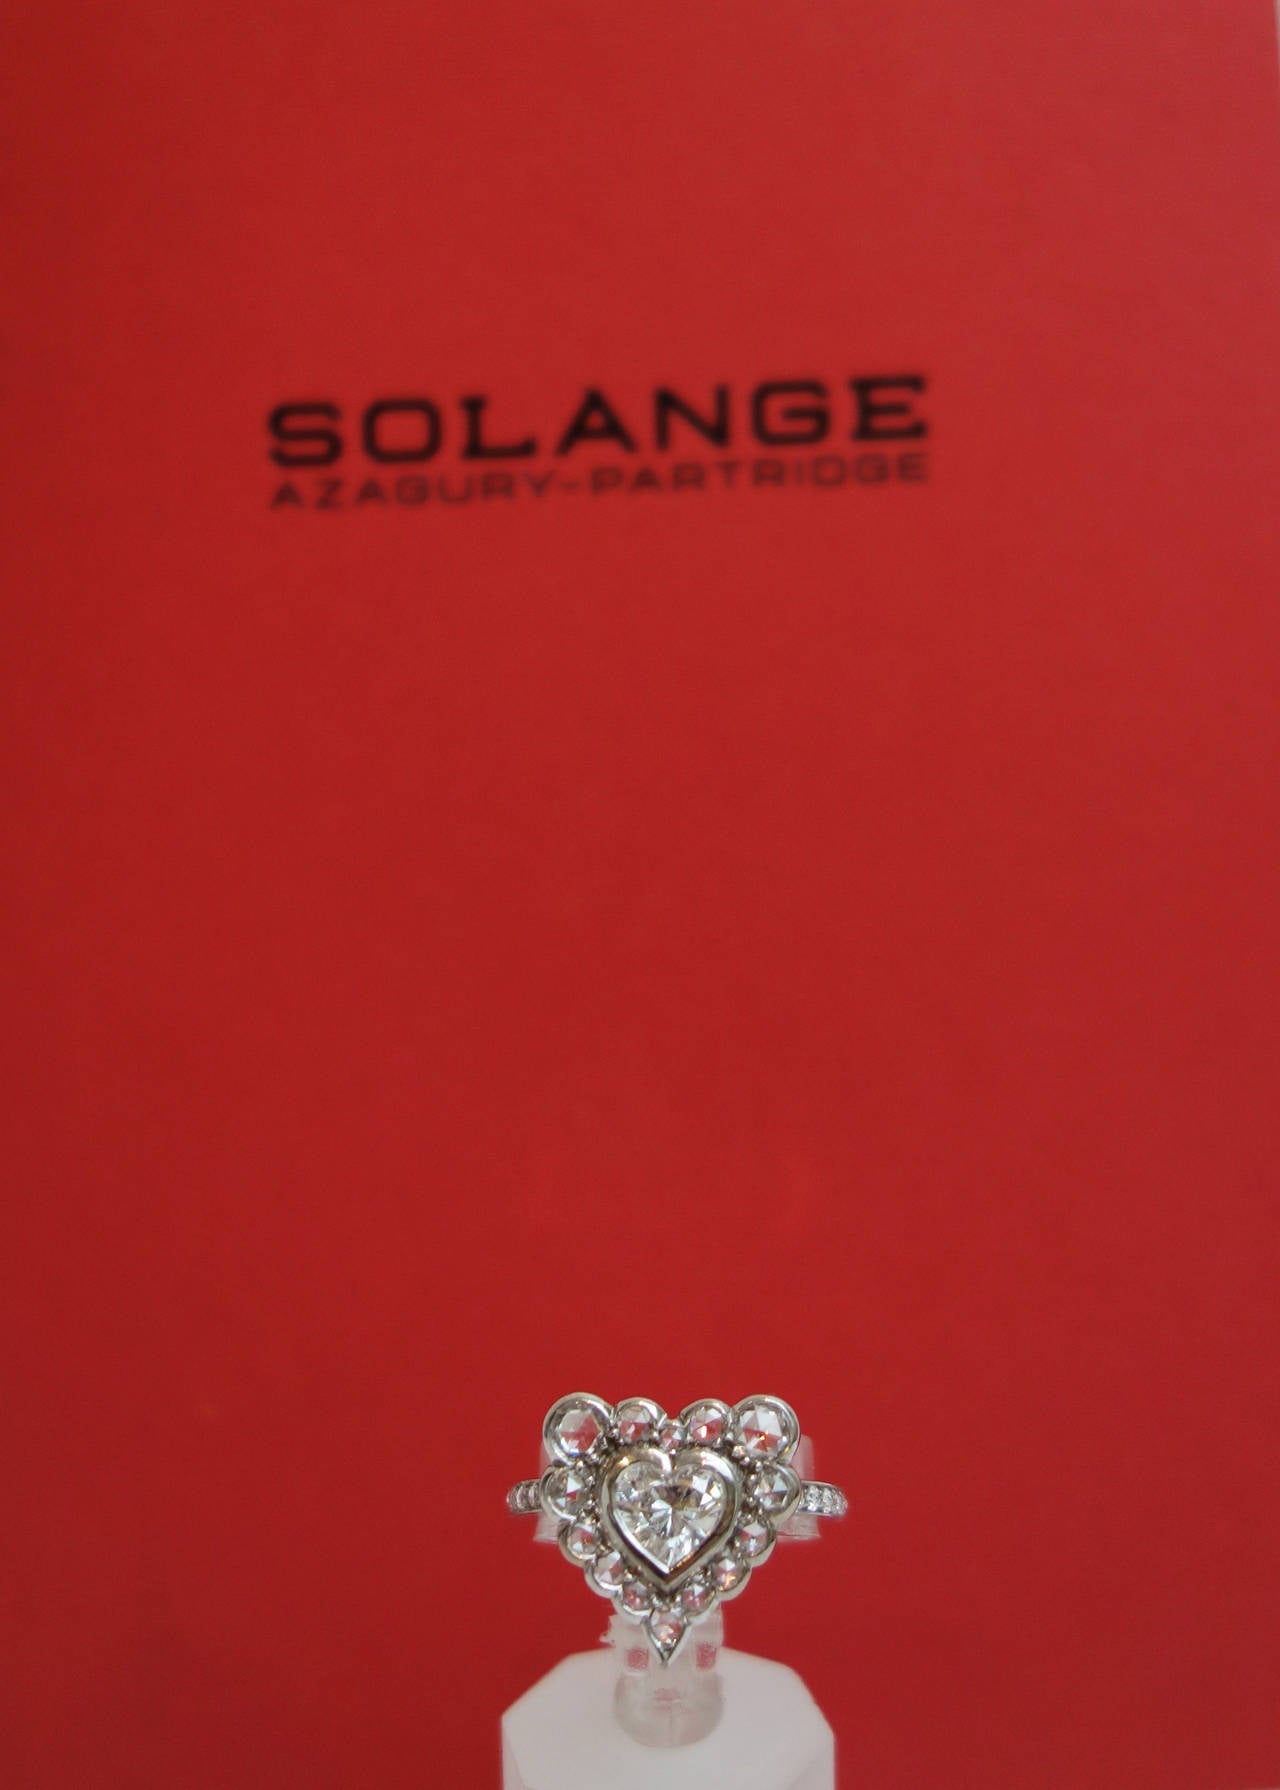 In 2010 Solange Azagury-Partridge lunched her 